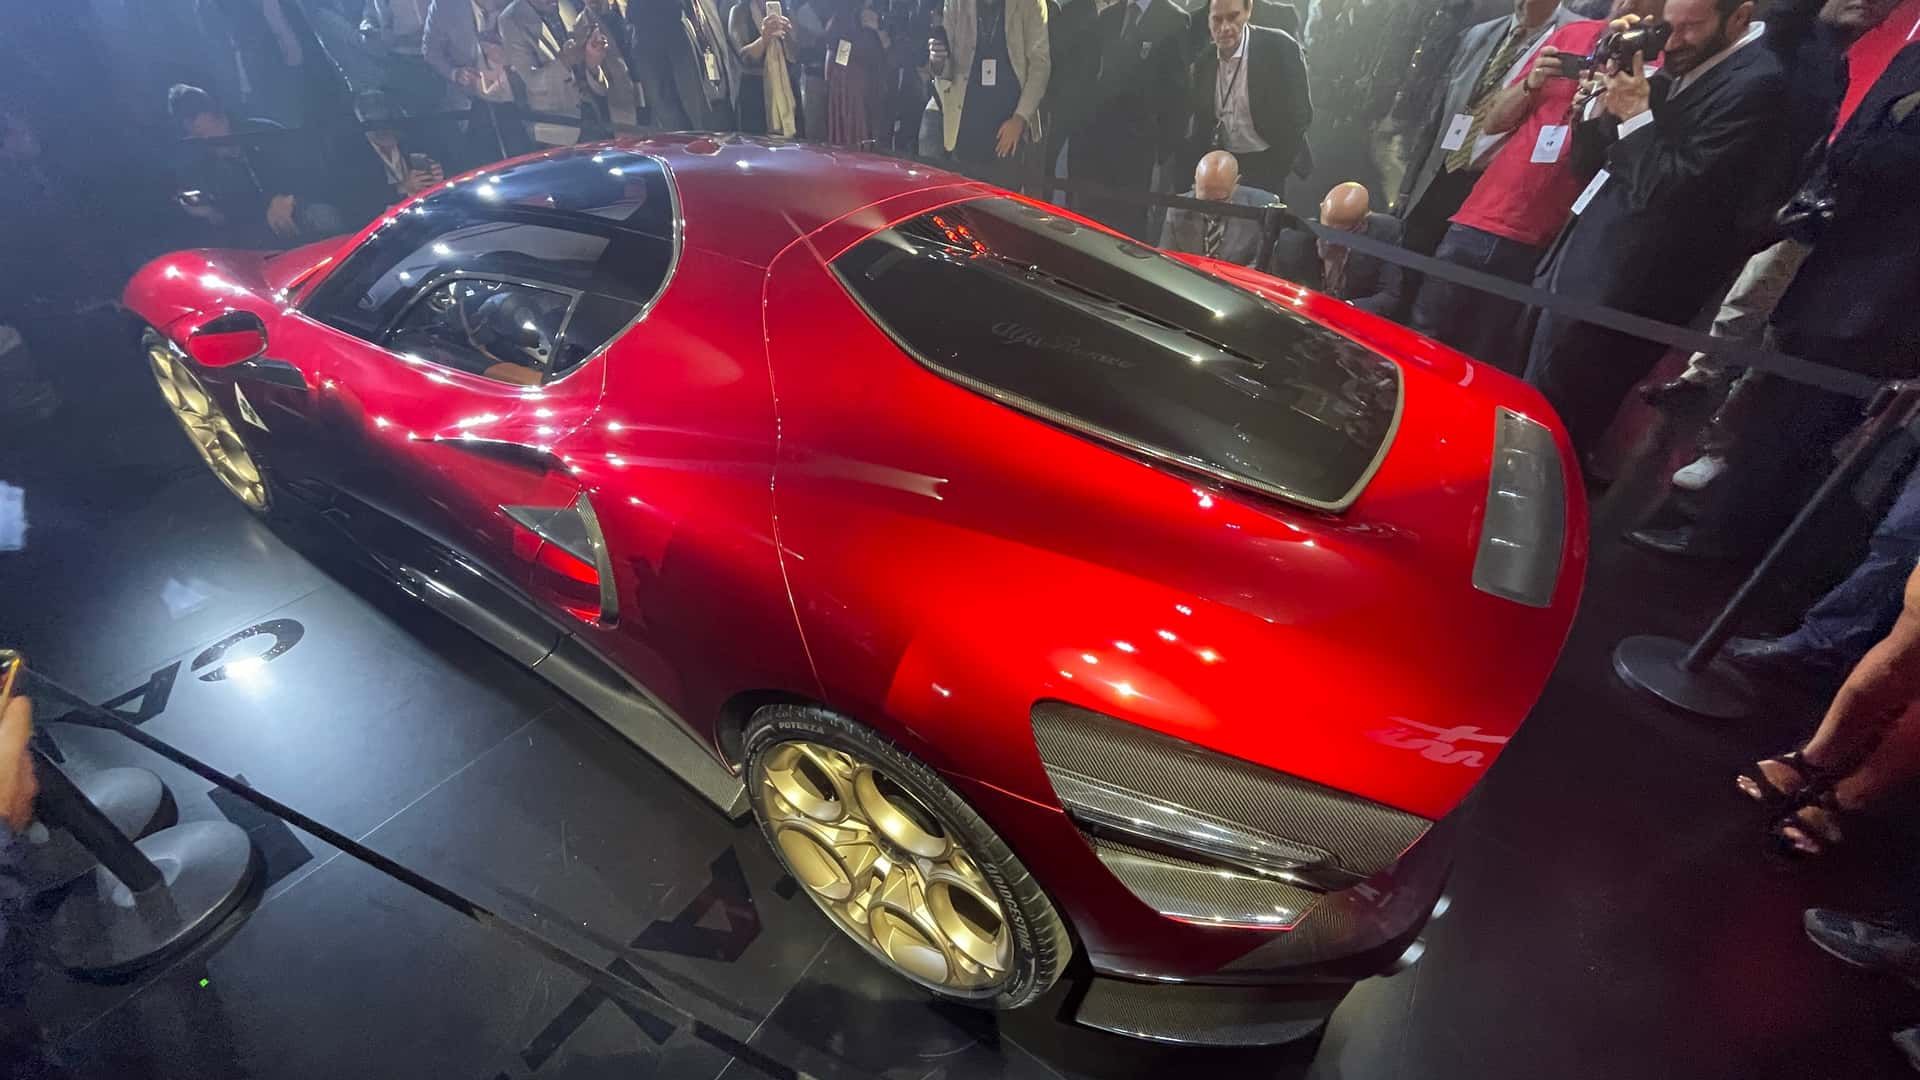 Alfa Romeo 33 Stradale Debuts With 620 HP And Even More Potent EV Version